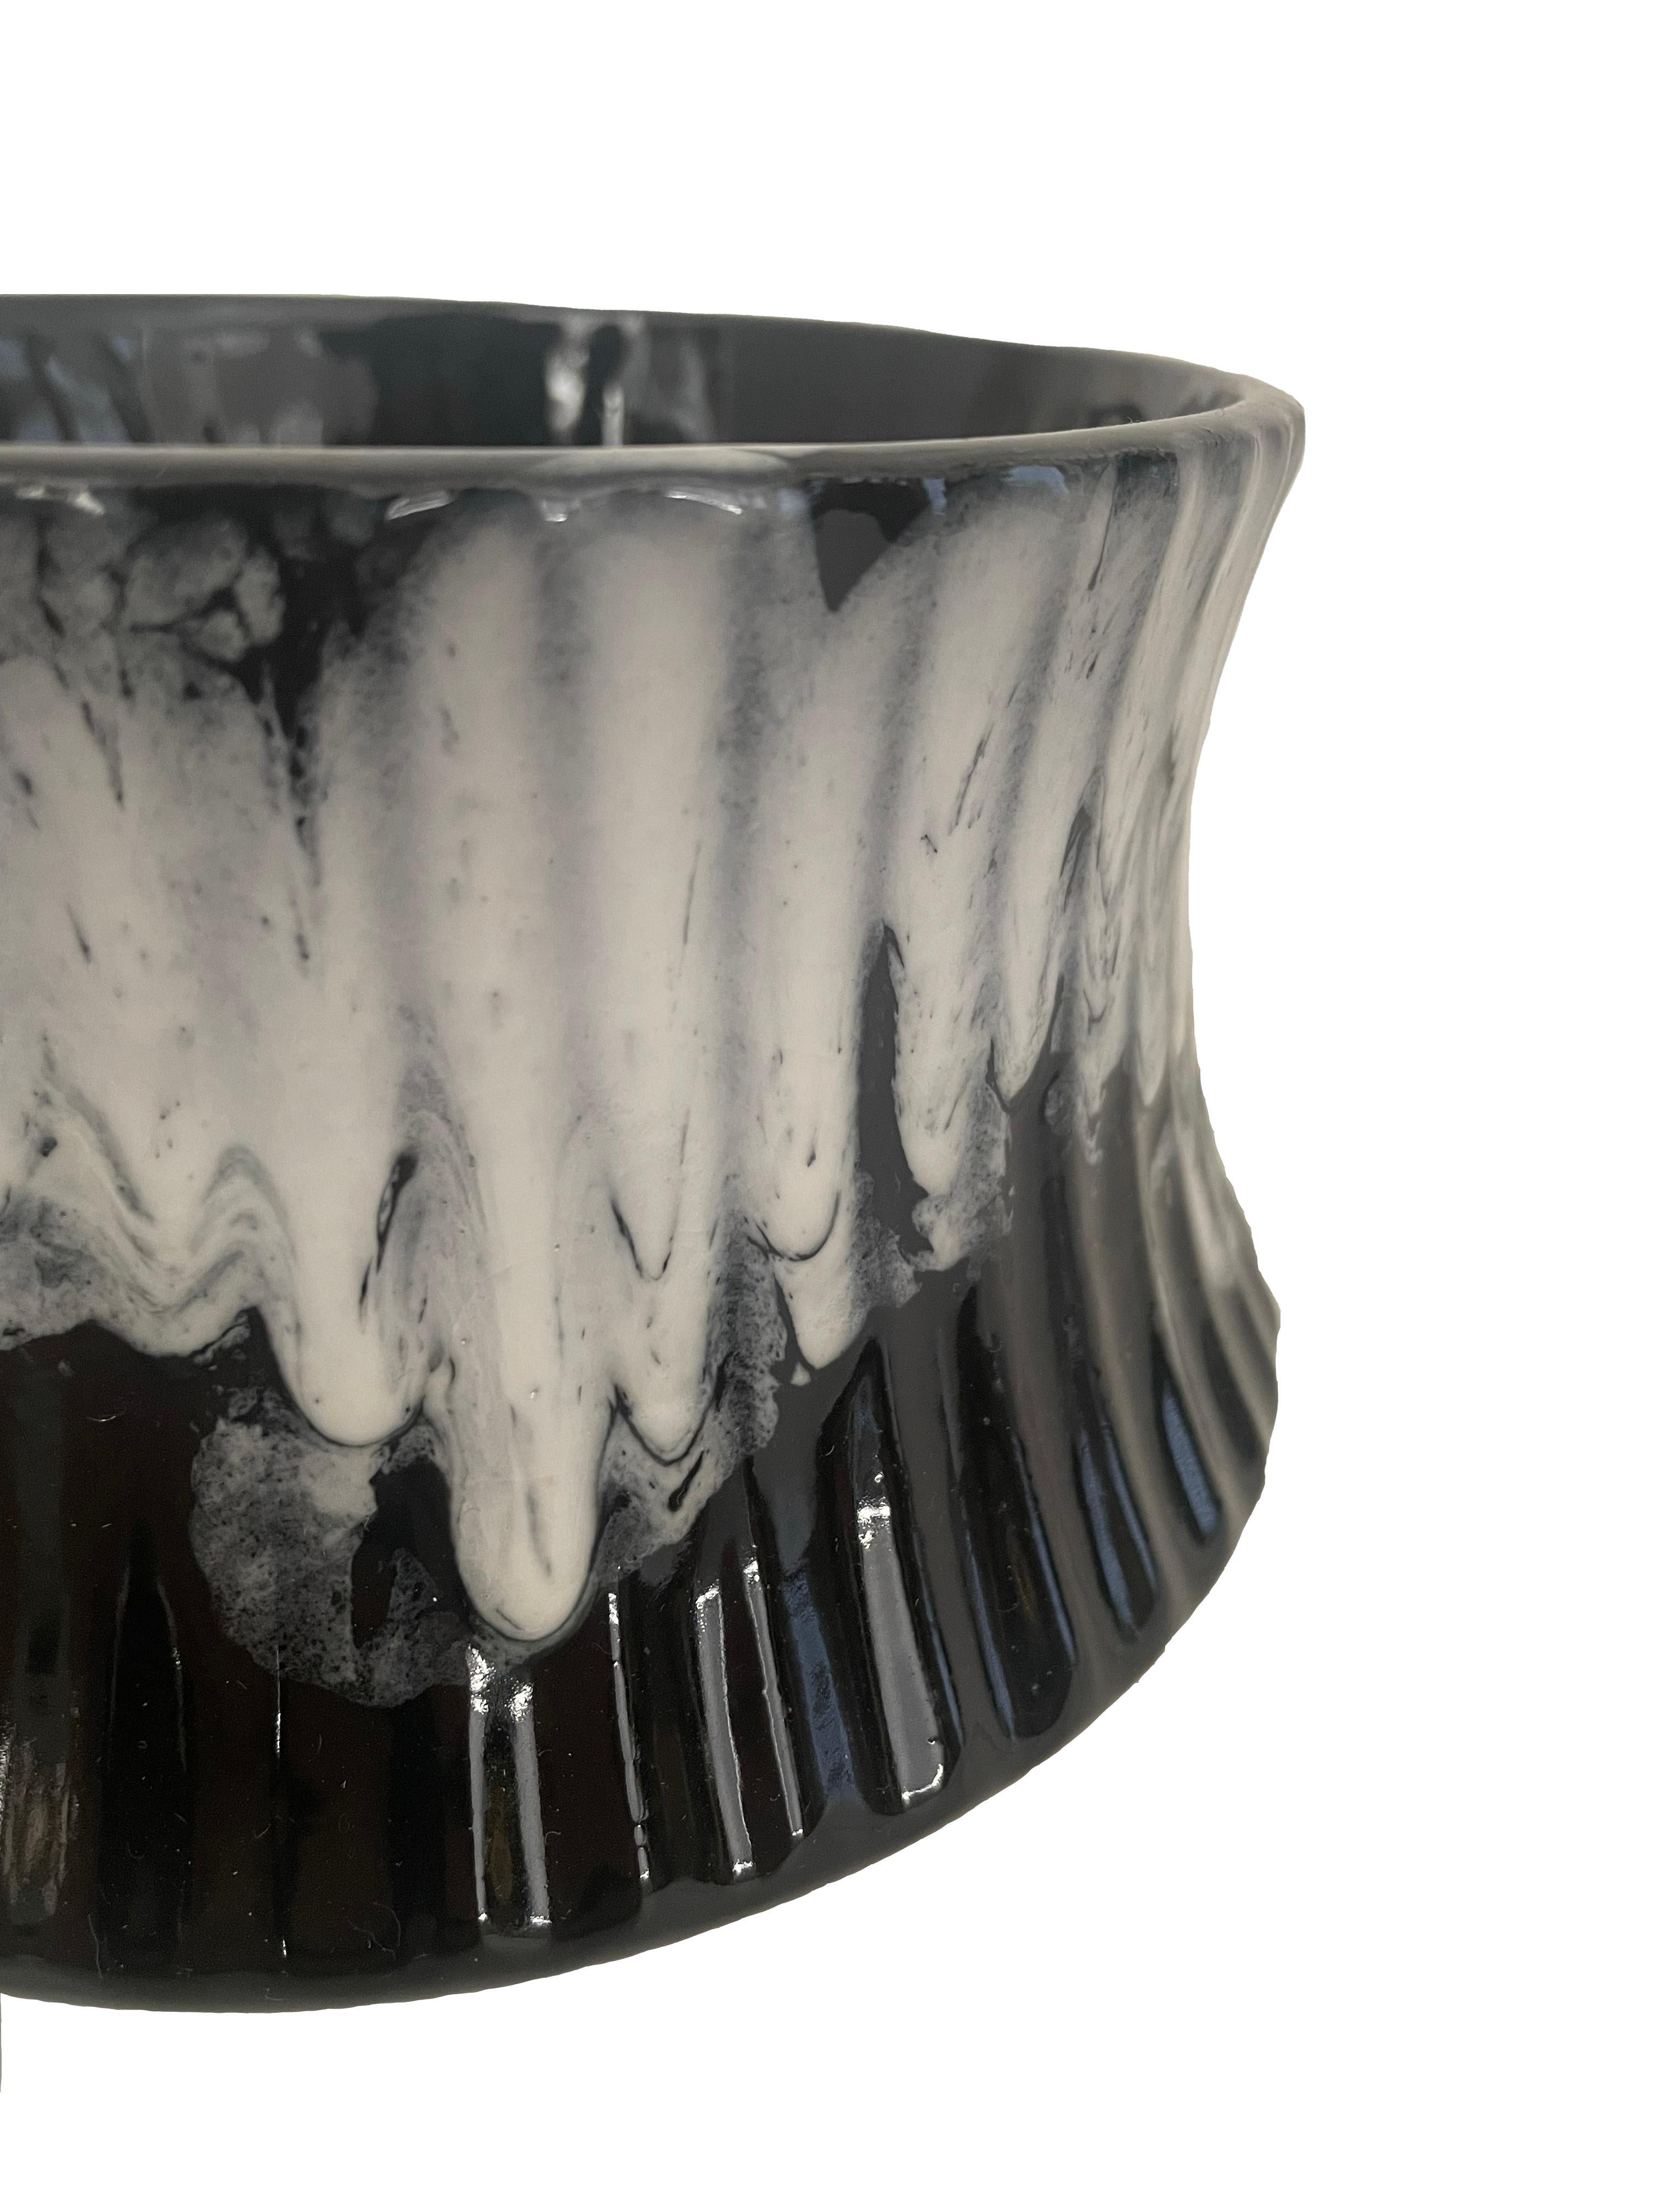 Hollywood Regency style glazed stoneware planter. Wheel-thrown, formed with fluted lip and vertical ribbing exterior detail. Black, high-gloss base with dripped glaze in a creamy-grey tone. Variation in glaze saturation throughout. The interior is